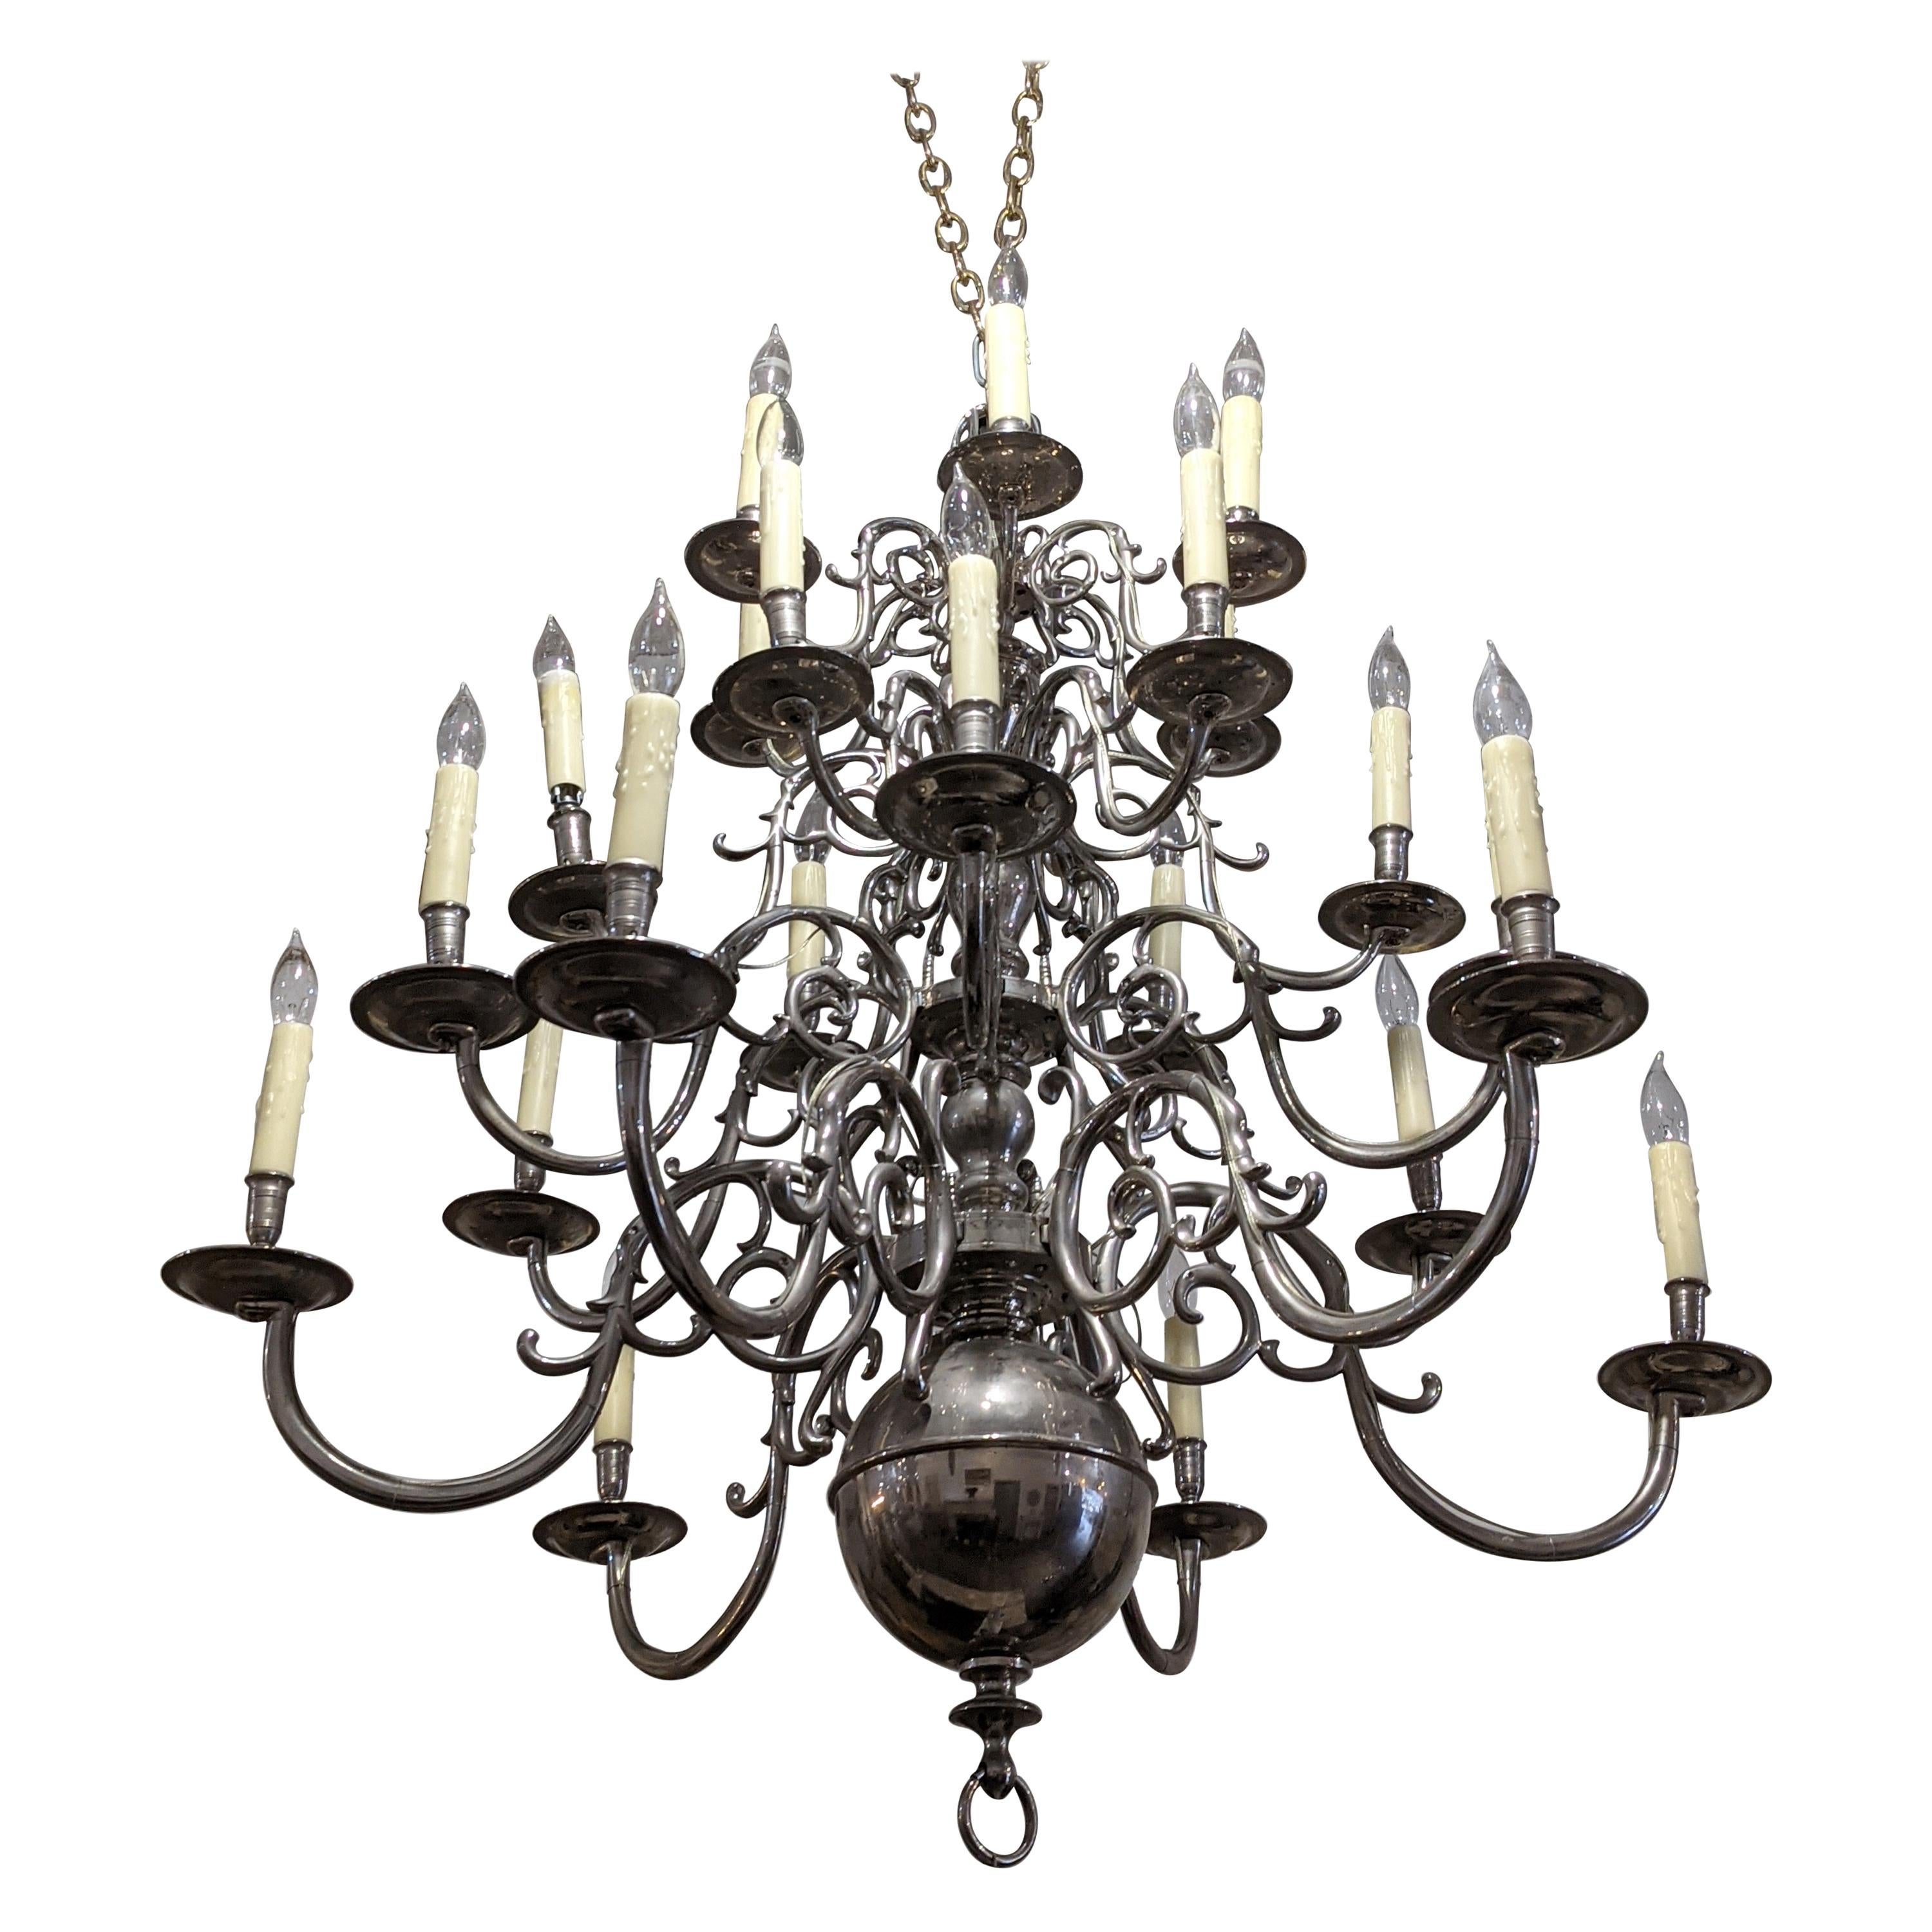 19th Century German Silver Chandelier from France